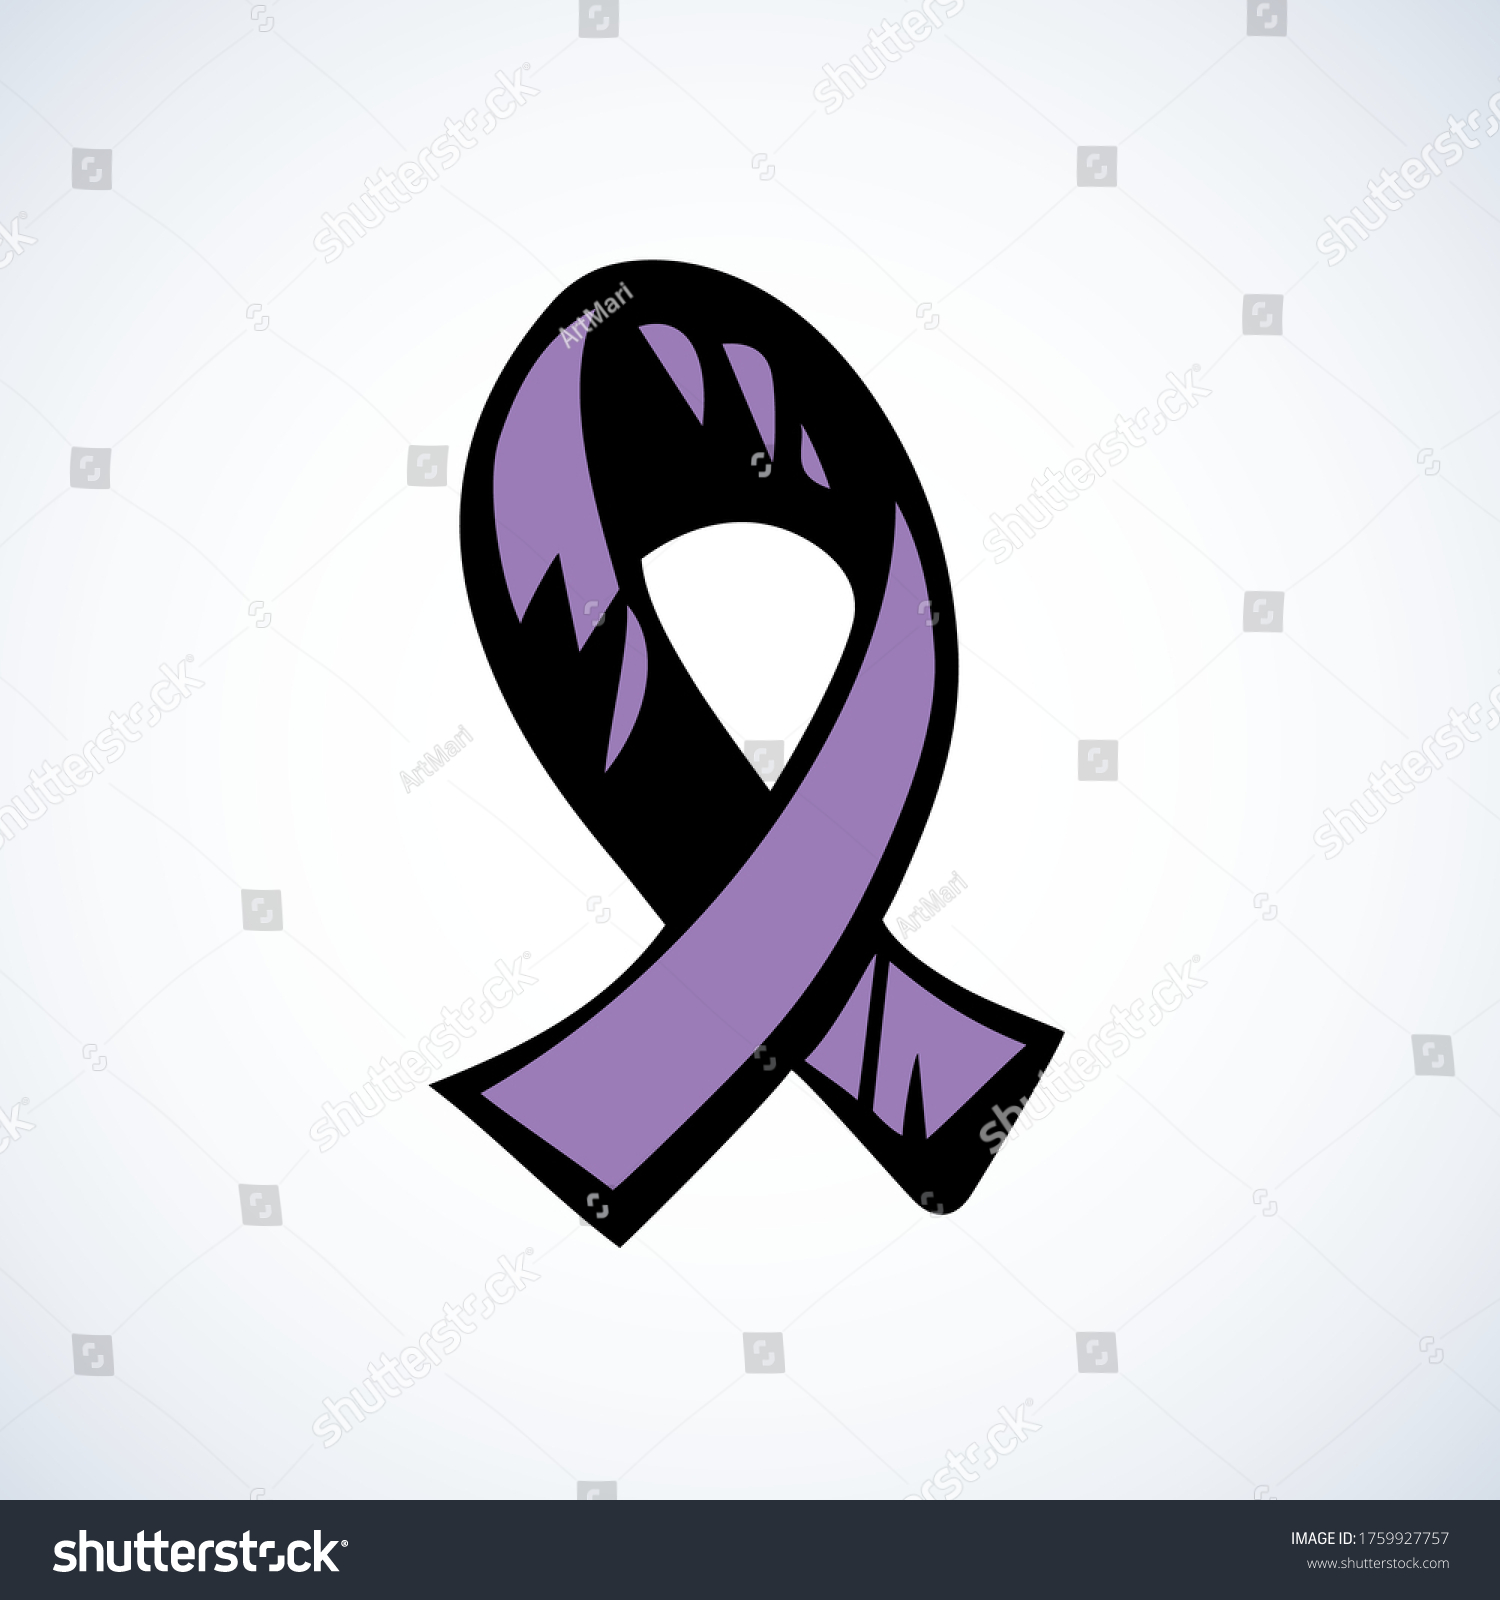 SVG of Logo of problem of epilepsy, eating concern, craniofacial, esophageal, pulmonary hypertension, all kinds of tumors. Abstract line issue hope icon concept. Hand drawn doodle graphic emblem lilac color svg